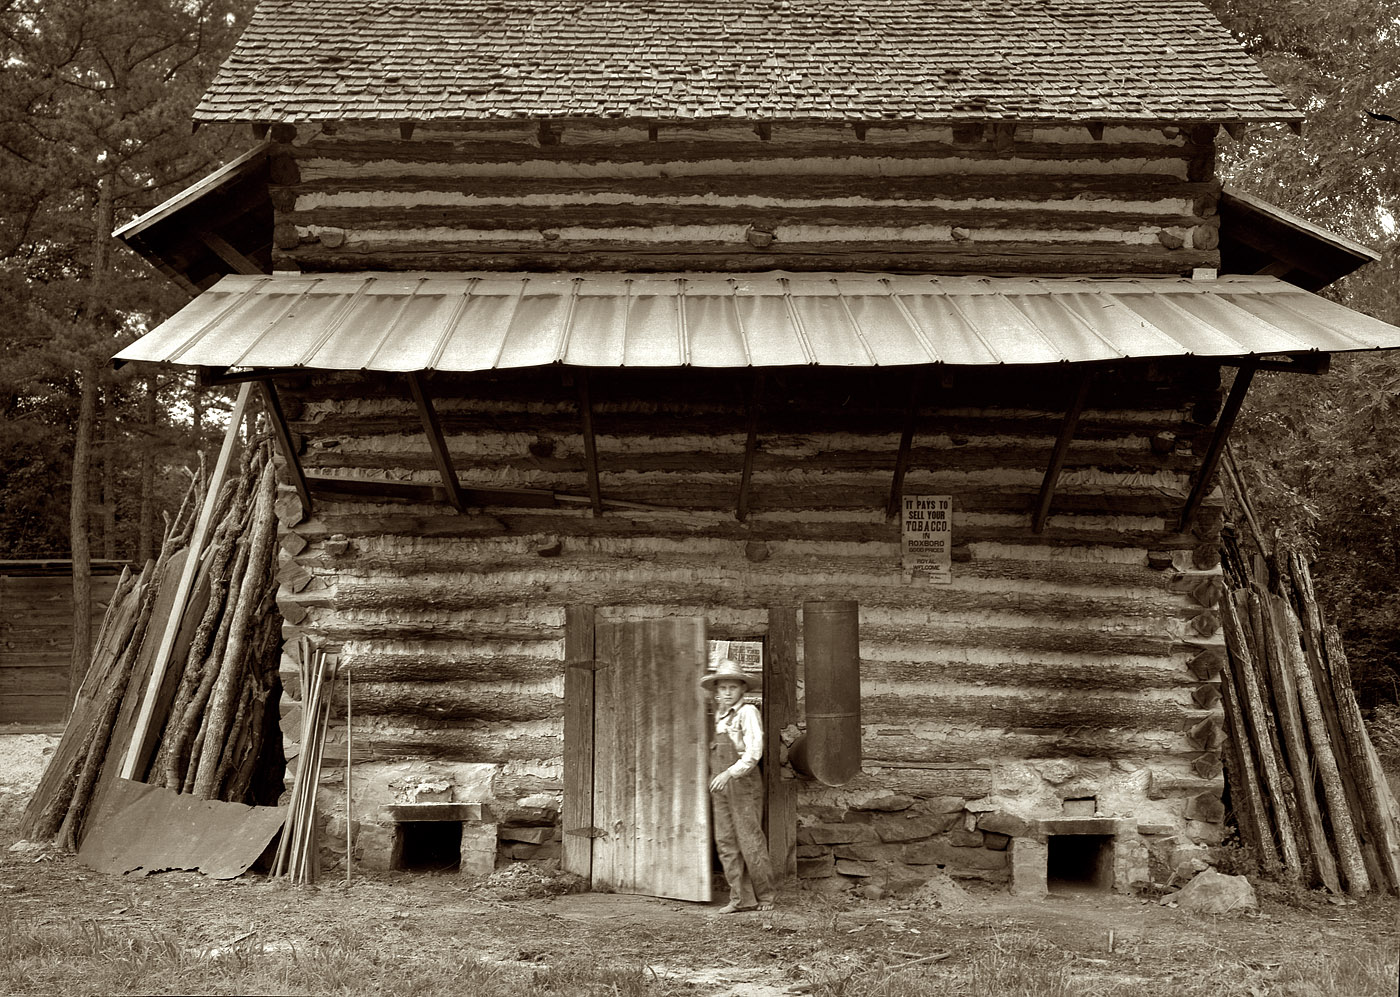 July 1939. Person County, North Carolina. A tobacco curing barn ready for "putting in," with fuel stacked on either side. The sticks are fed in through the small openings at the base. Piece of sheet iron on the left is used to cover the opening of the furnace when starting the fire. View full size. Medium-format nitrate negative by Dorothea Lange for the Farm Security Administration.